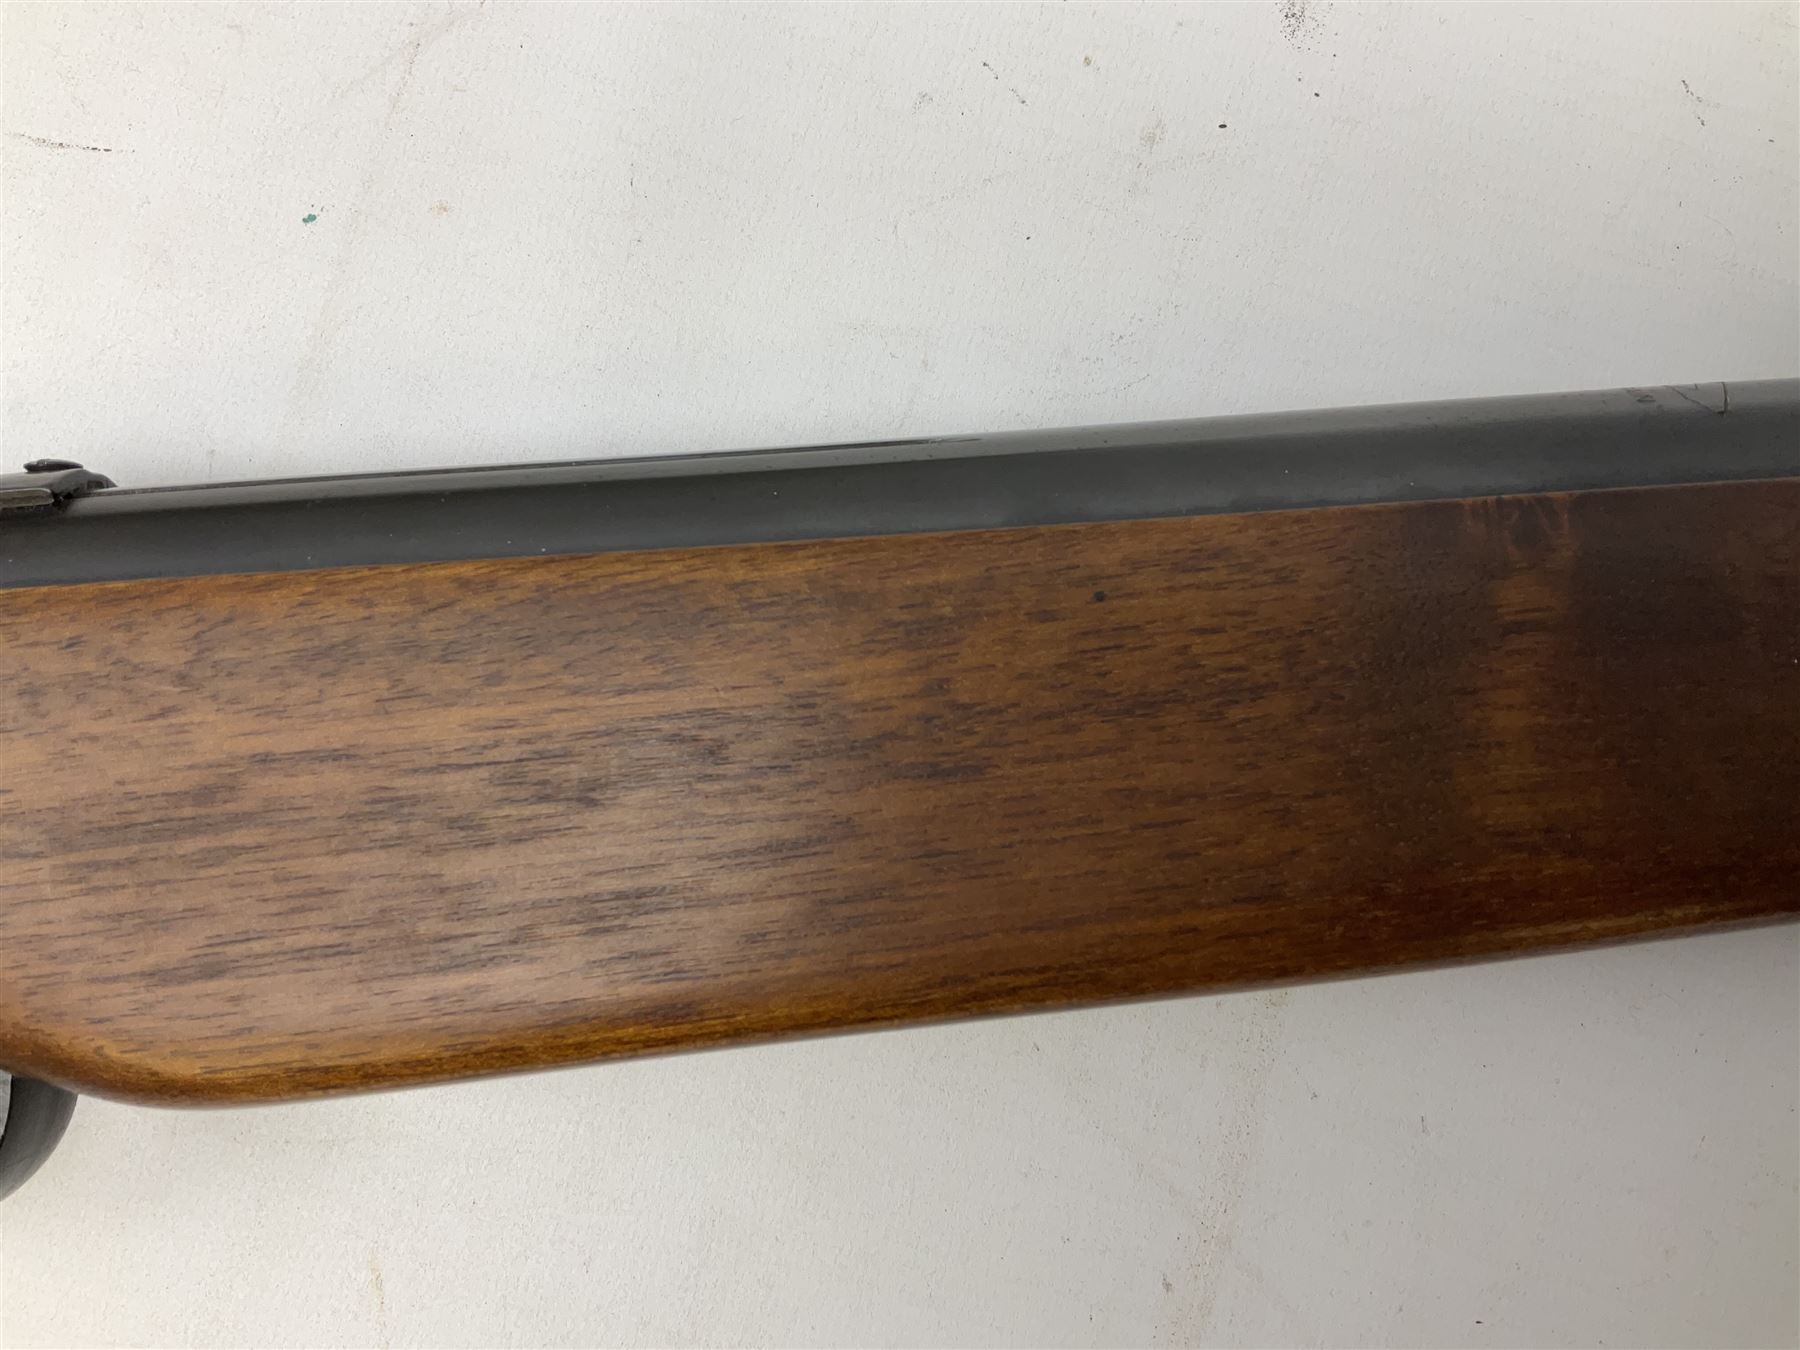 Gamo Magnum 2000 .22 air rifle with break barrel action and trigger guard safety - Image 7 of 18